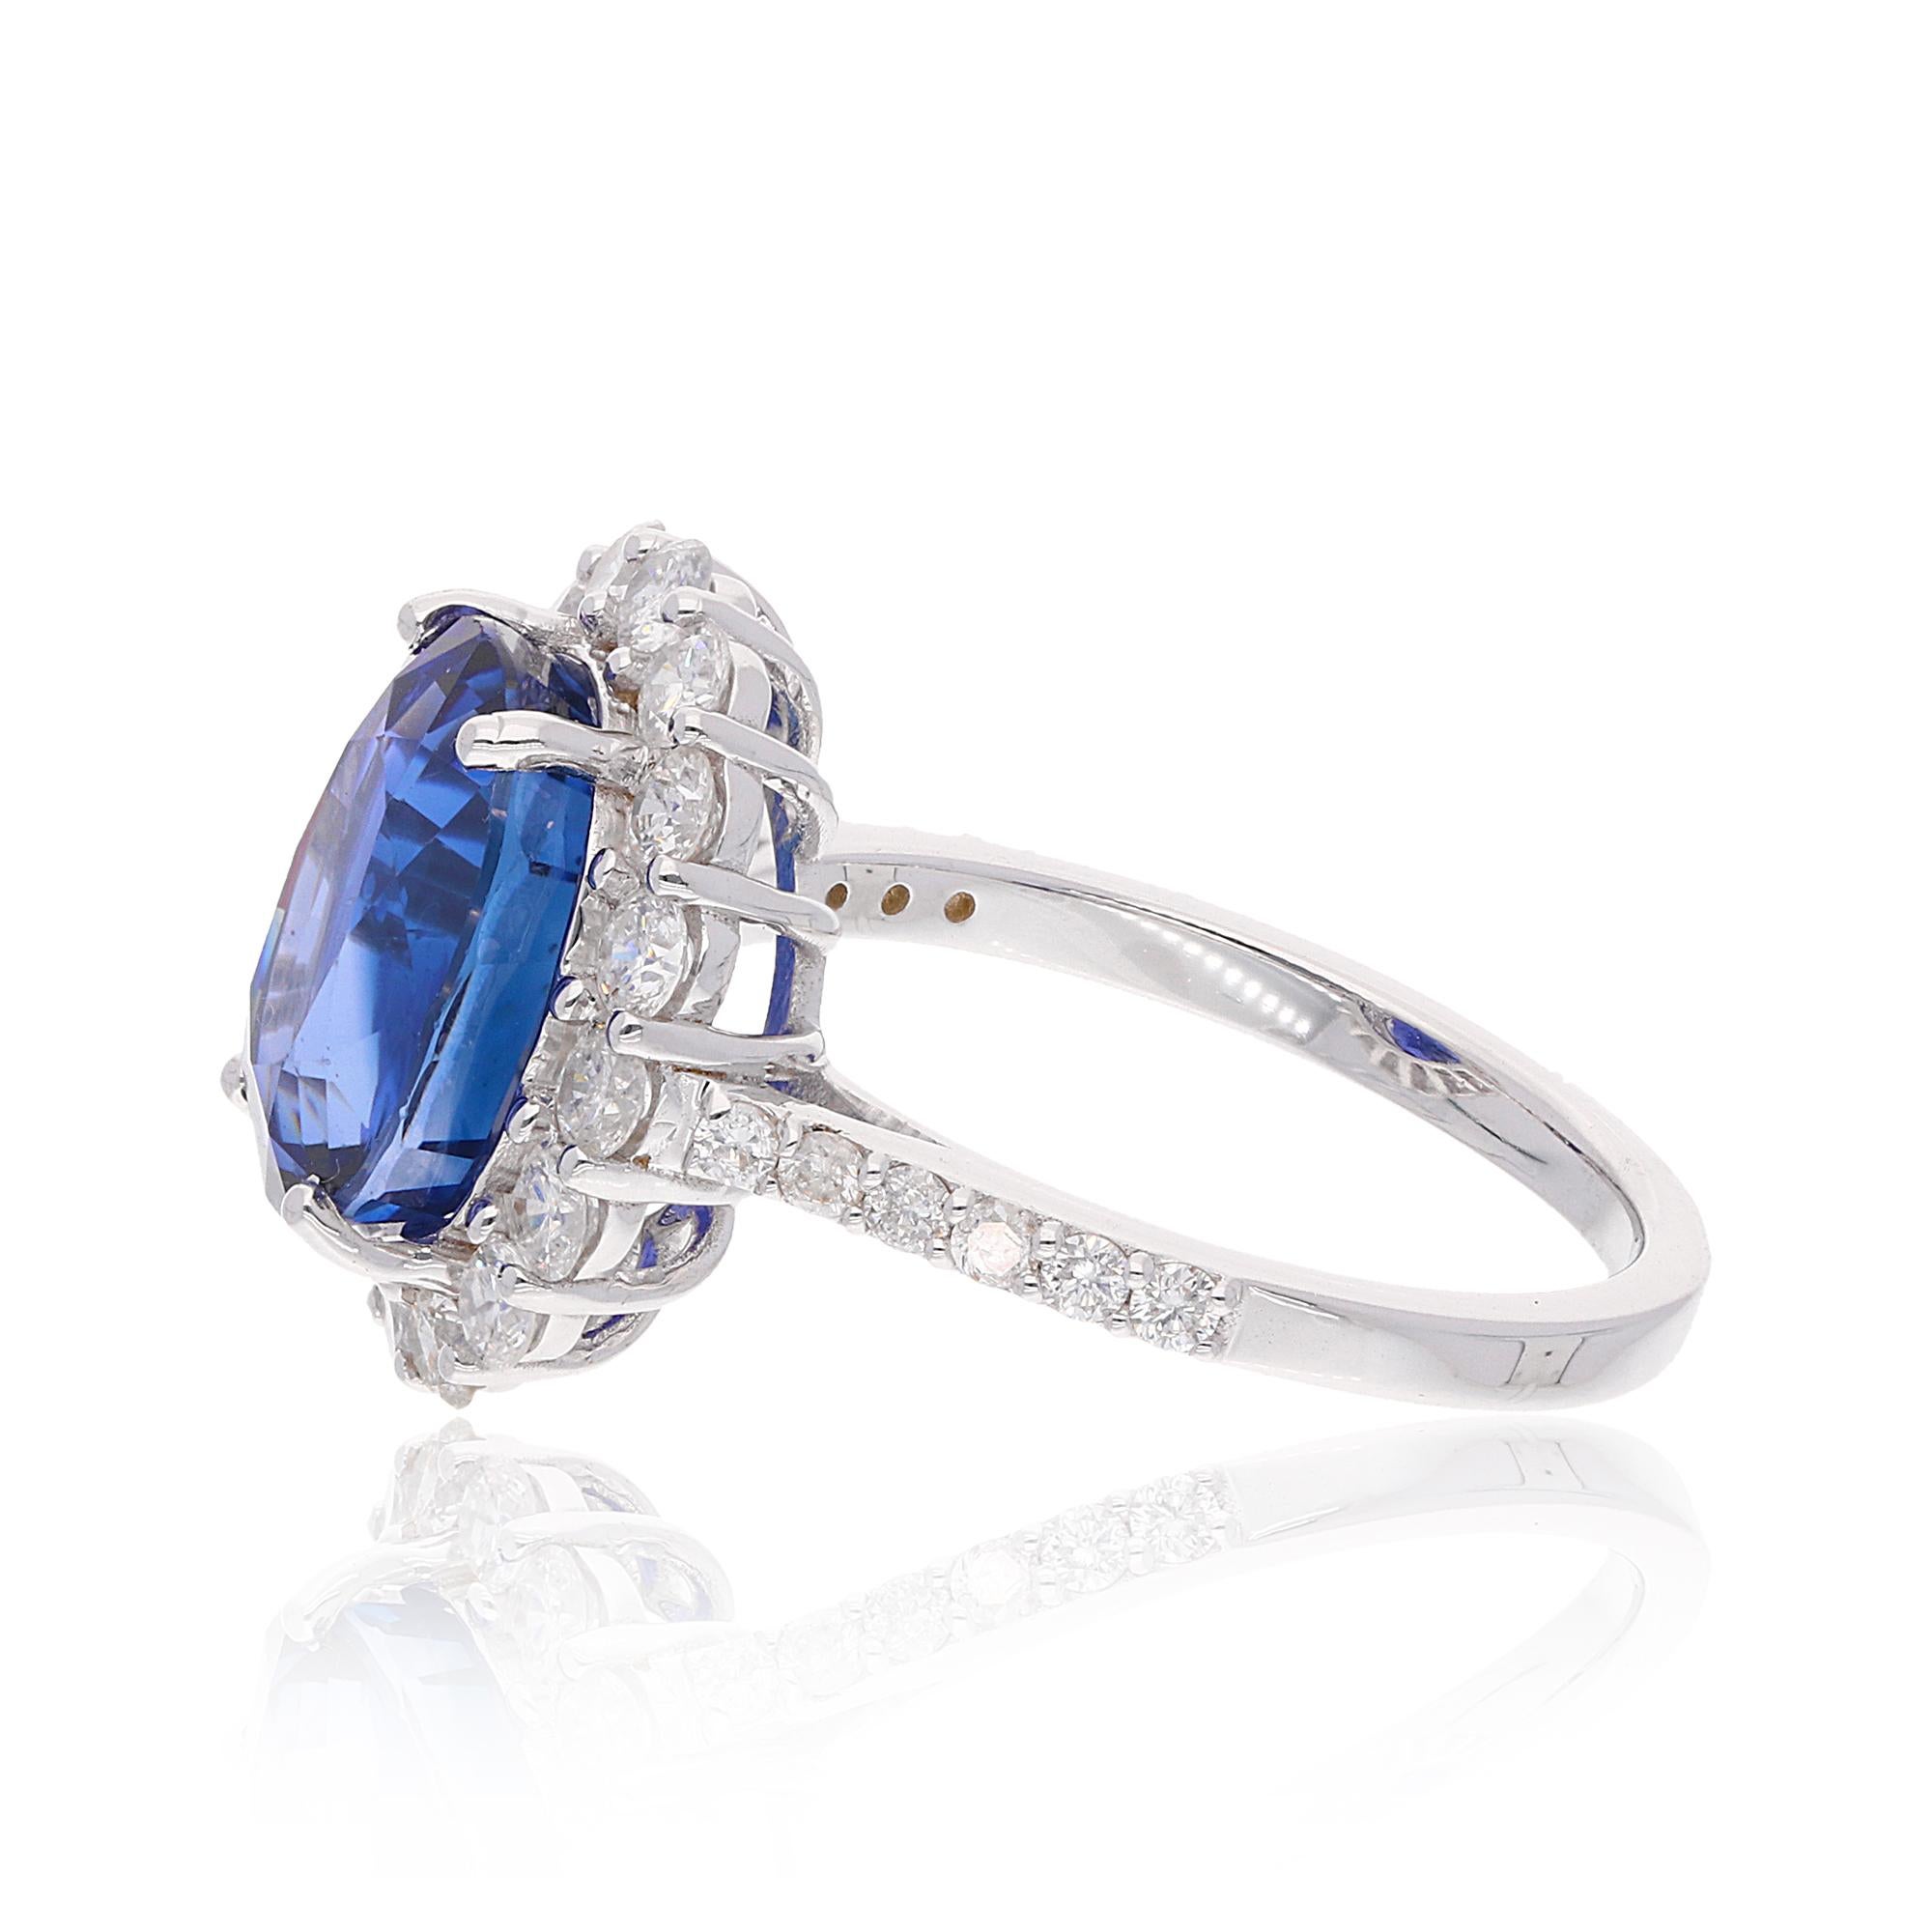 For Sale:  Oval Blue Sapphire Gemstone Ring SI Clarity HI Color Diamond 18 Karat White Gold 2